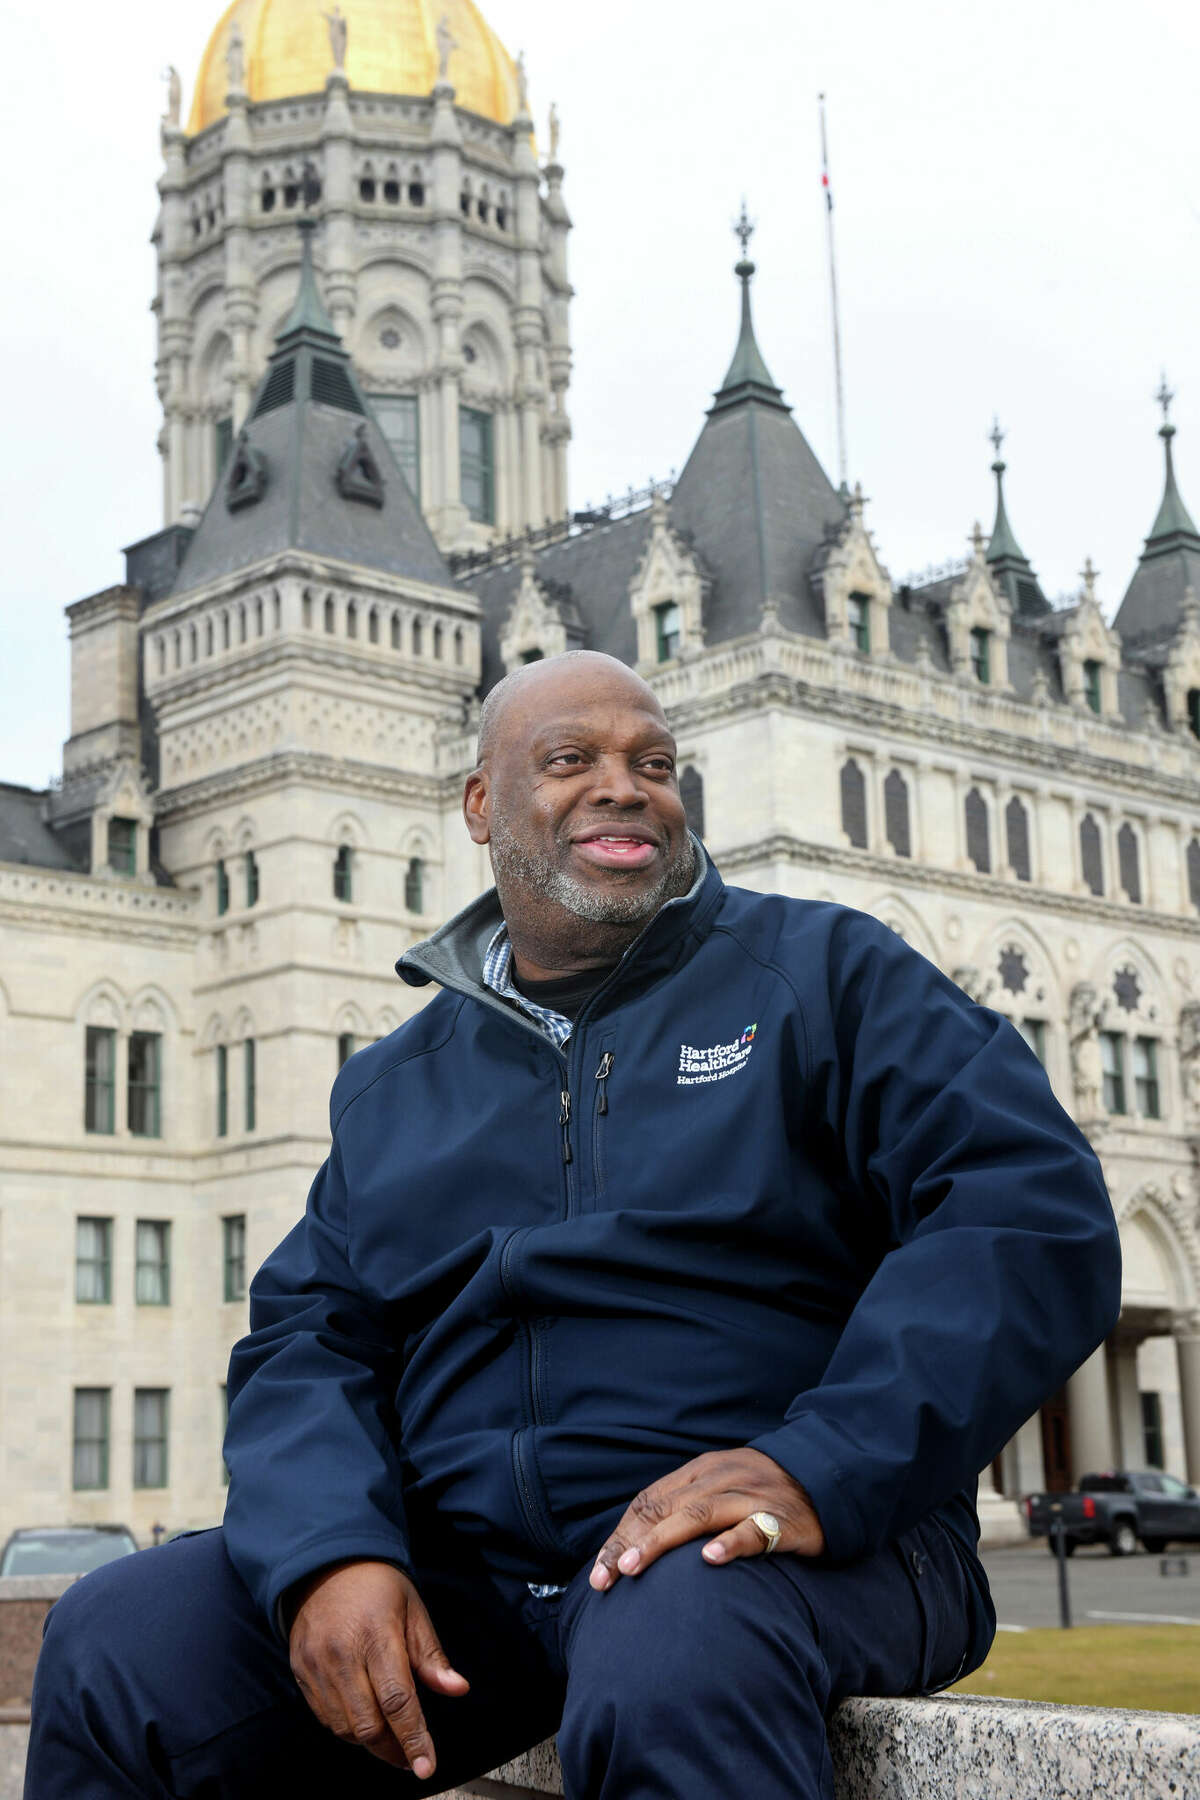 Mack Young smiles as he poses on the grounds of the Connecticut State Capitol, in Hartford, Conn. March 3, 2023. Young was released from state prison last year after serving nearly 30-years for a 1995 homicide conviction.